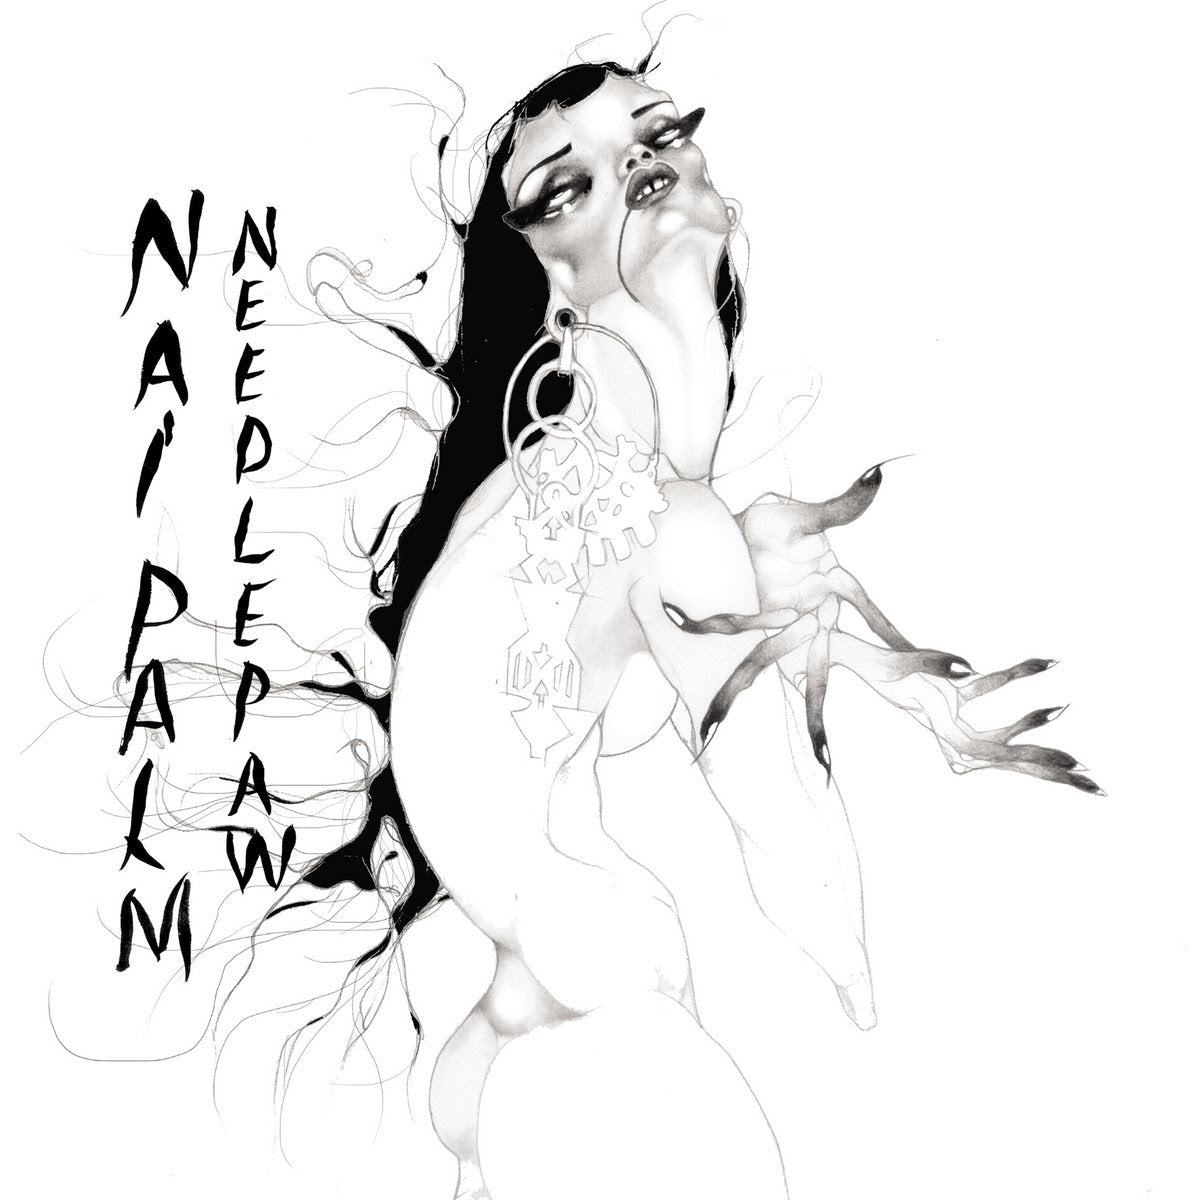 Nai Palm - Needle Paw | Buy the Vinyl LP from Flying Nun Records